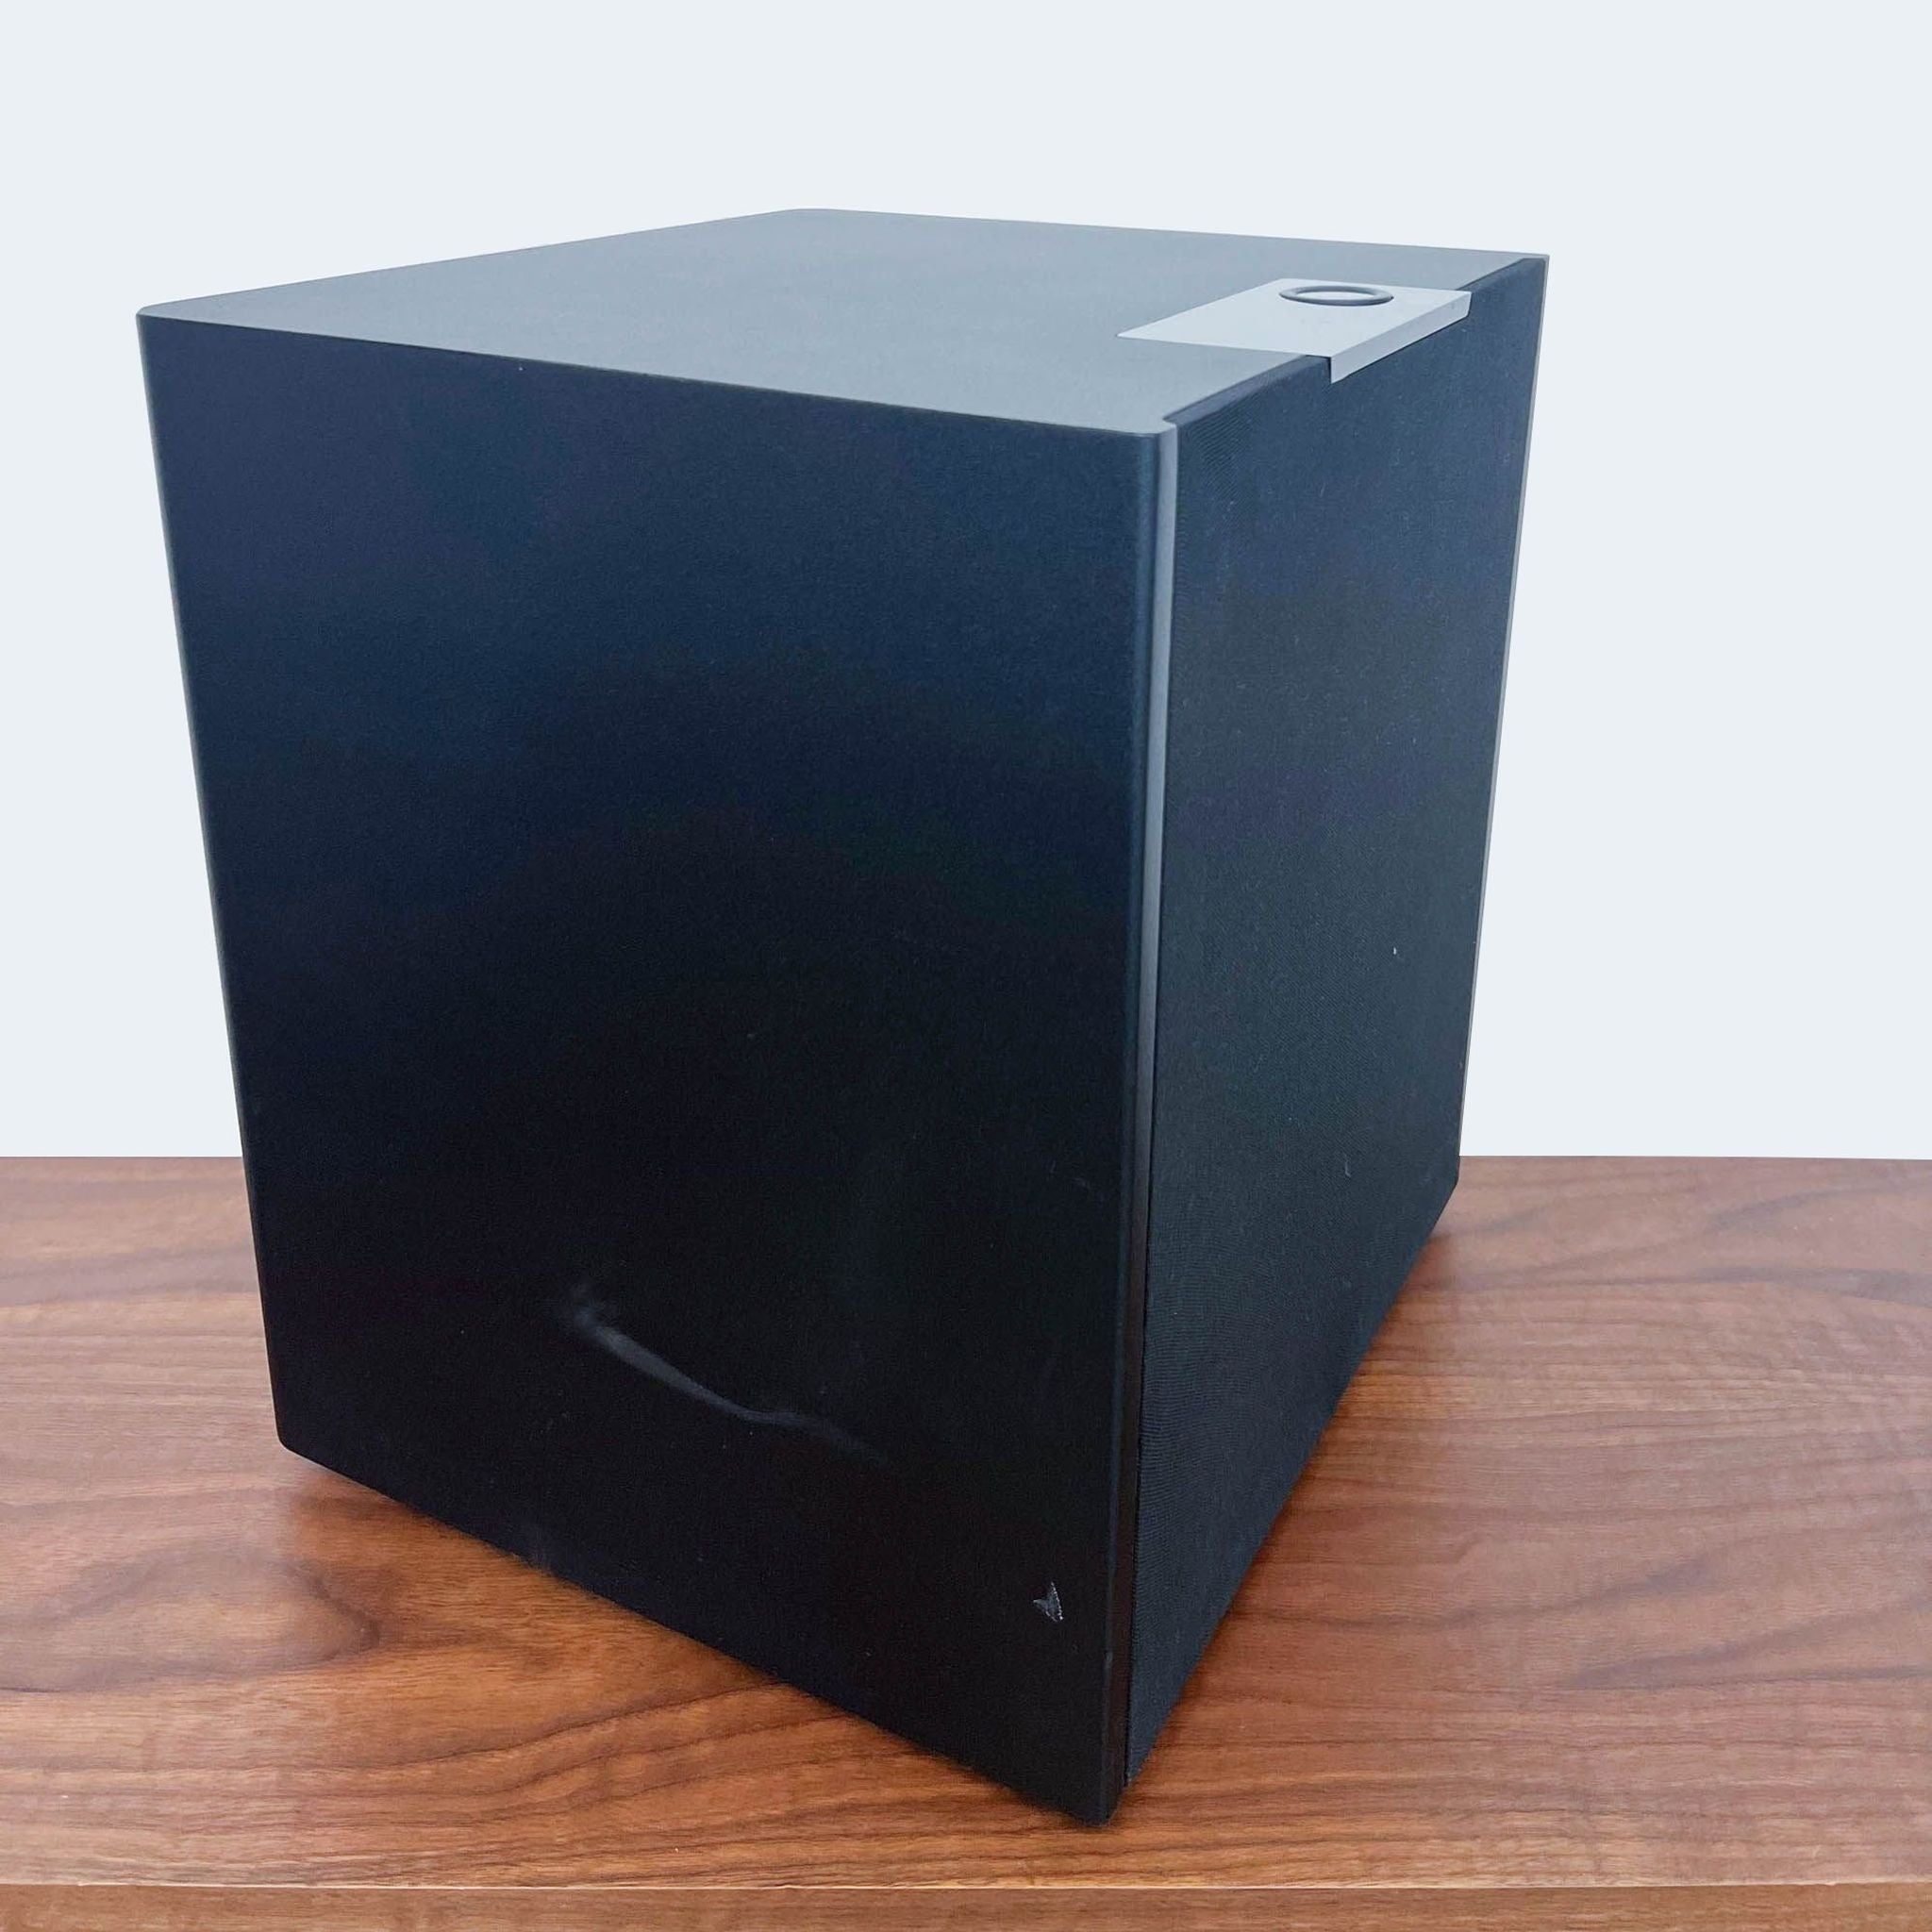 Black Triad subwoofer on wooden surface against a white background.